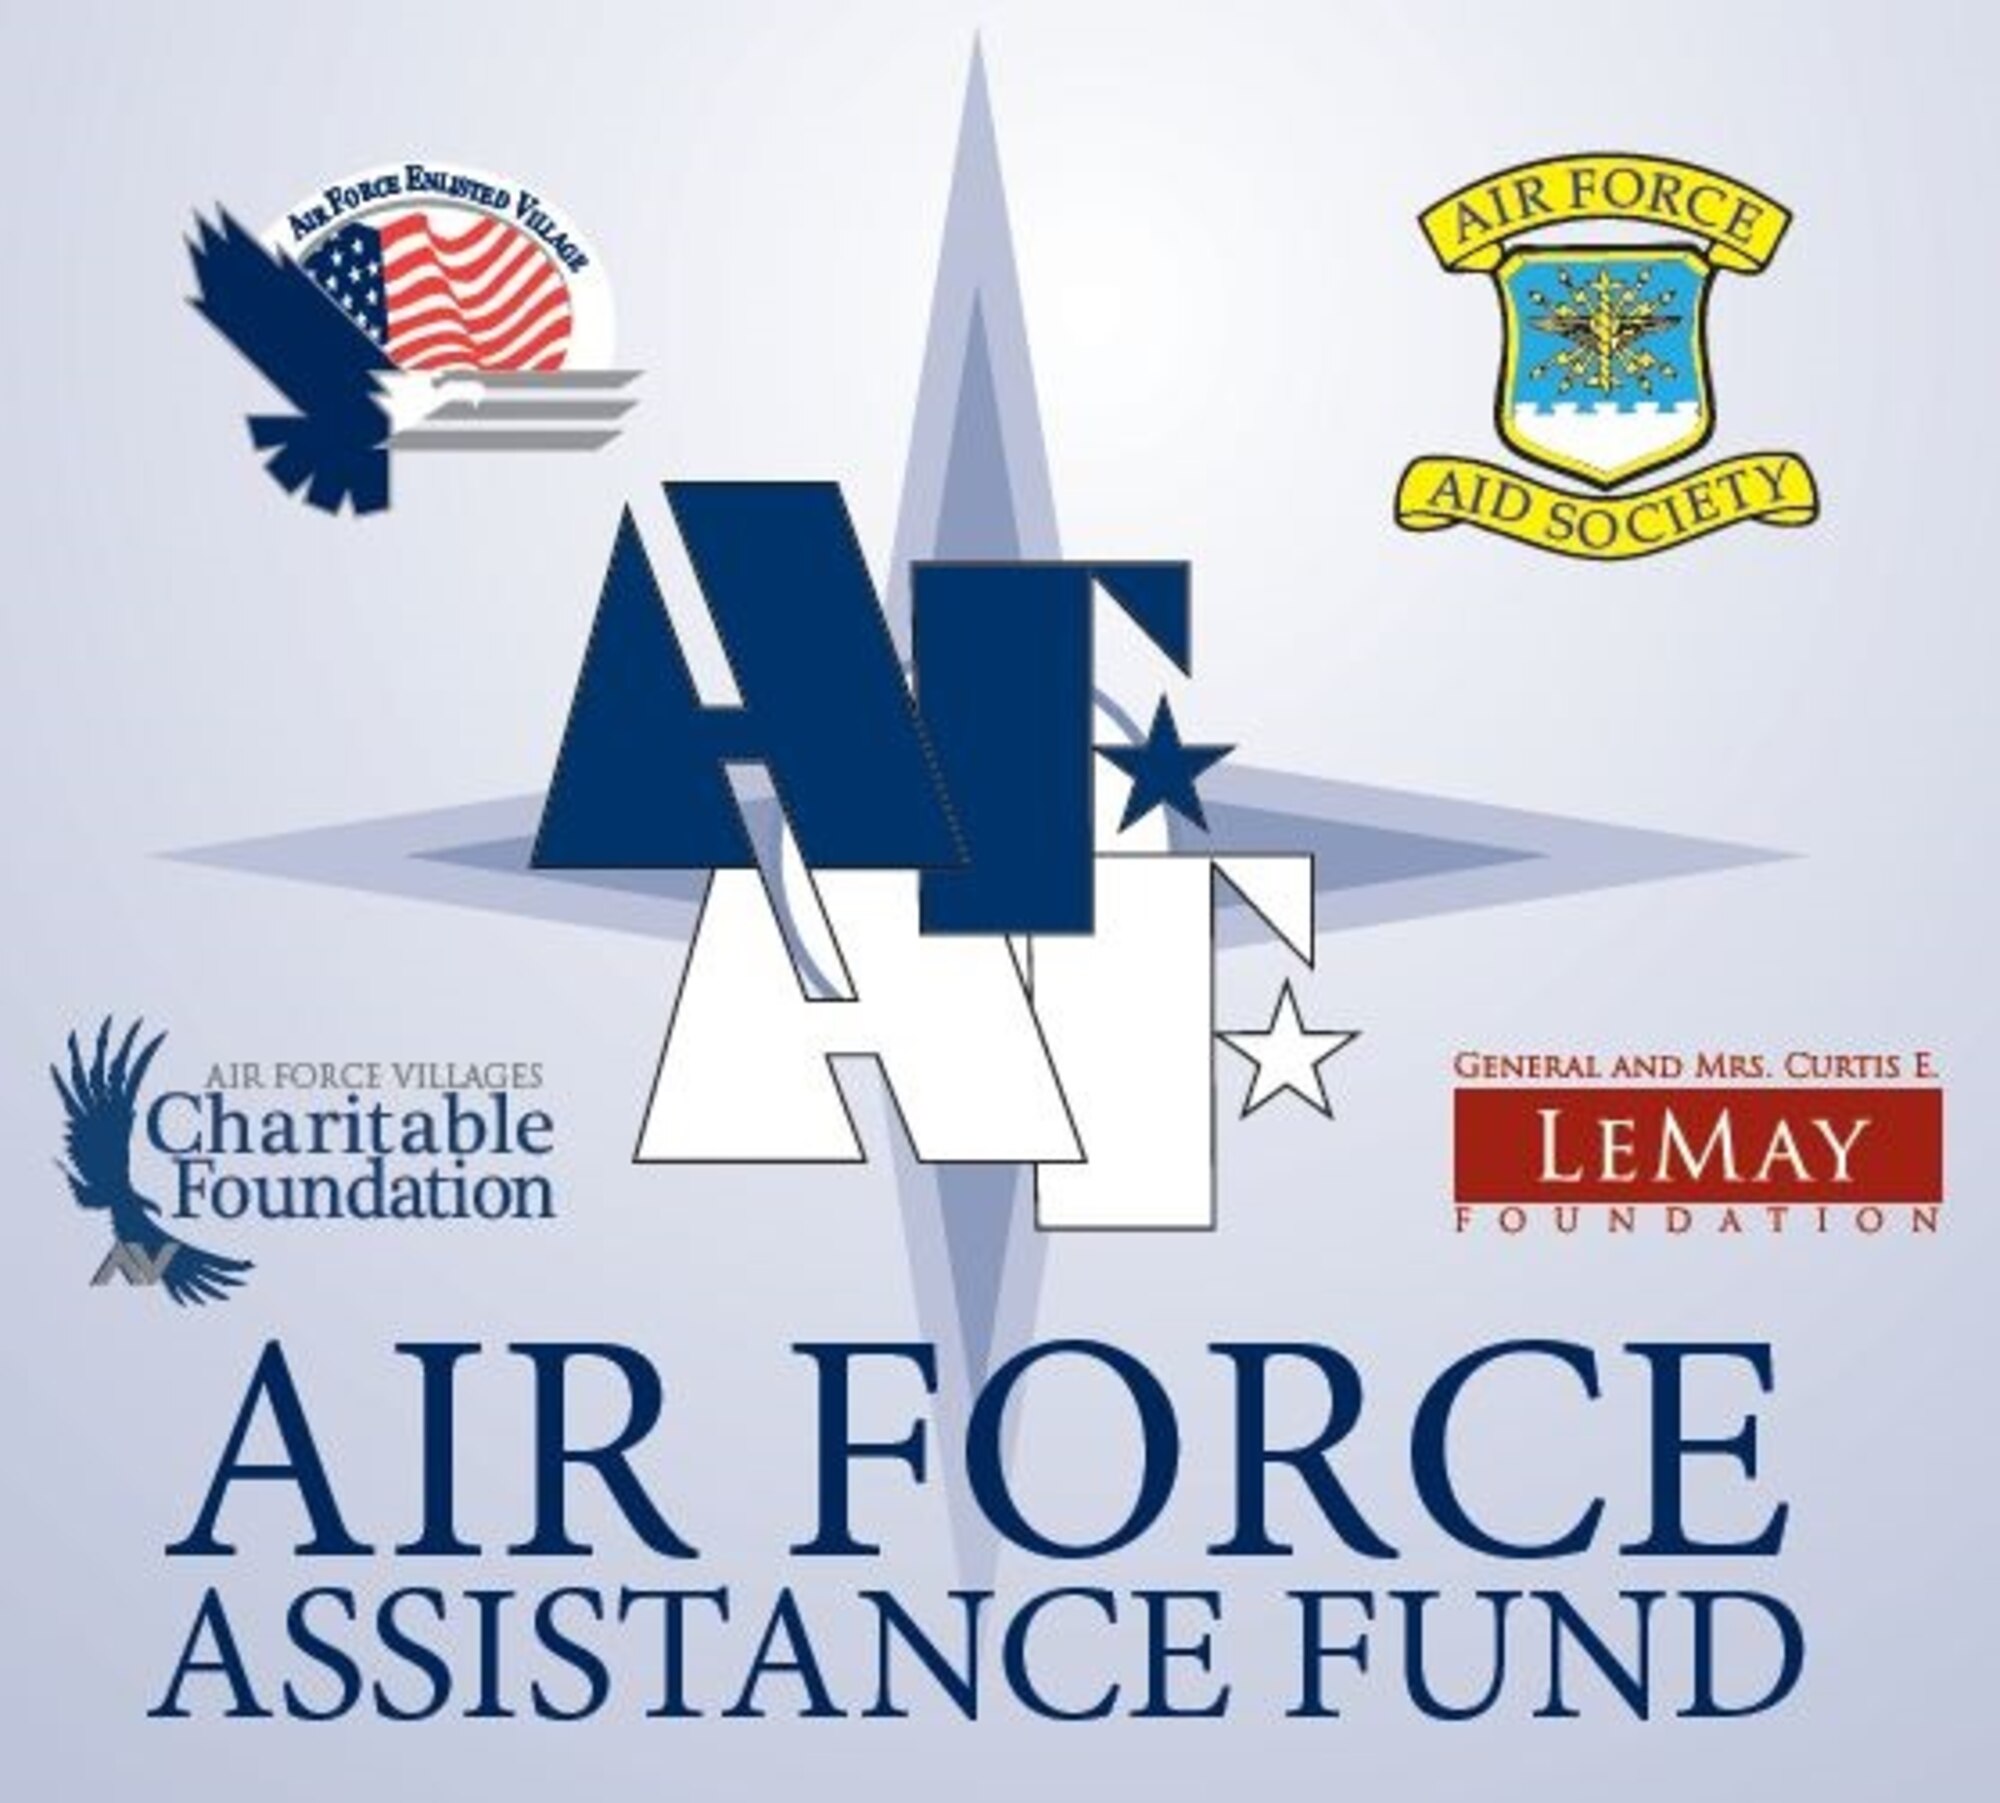 The Air Force kicked off the Air Force Assistance Fund Monday, March 21, 2016. AFAF is about Air Force people taking care of their own… Airmen helping Airmen. The AFAF has four charitable affiliates: Air Force Enlisted Village, LeMay Foundation, Air Force Villages Charitable Foundation and Air Force Aid Society. (Courtesy graphic)